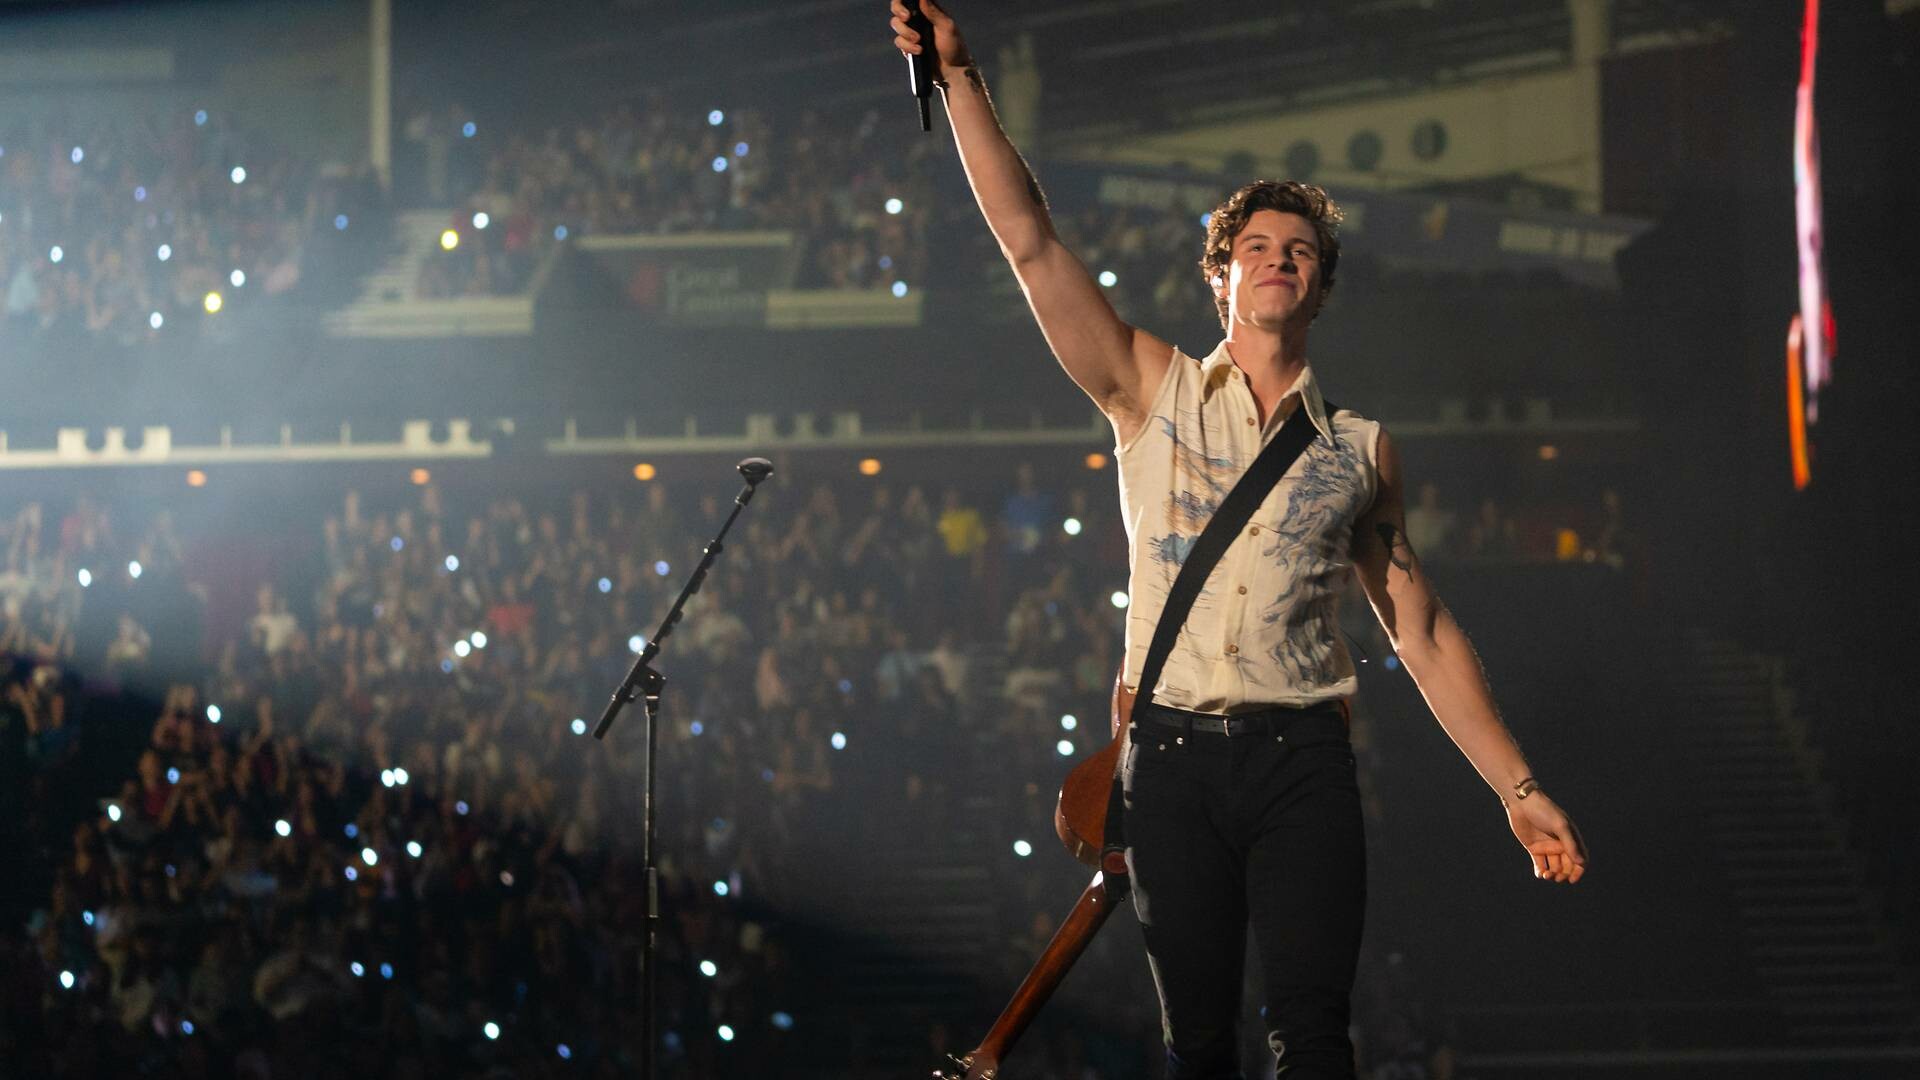 Shawn Mendes: "Where Were You in the Morning?" was released as the fourth single on May 18, 2018. 1920x1080 Full HD Background.